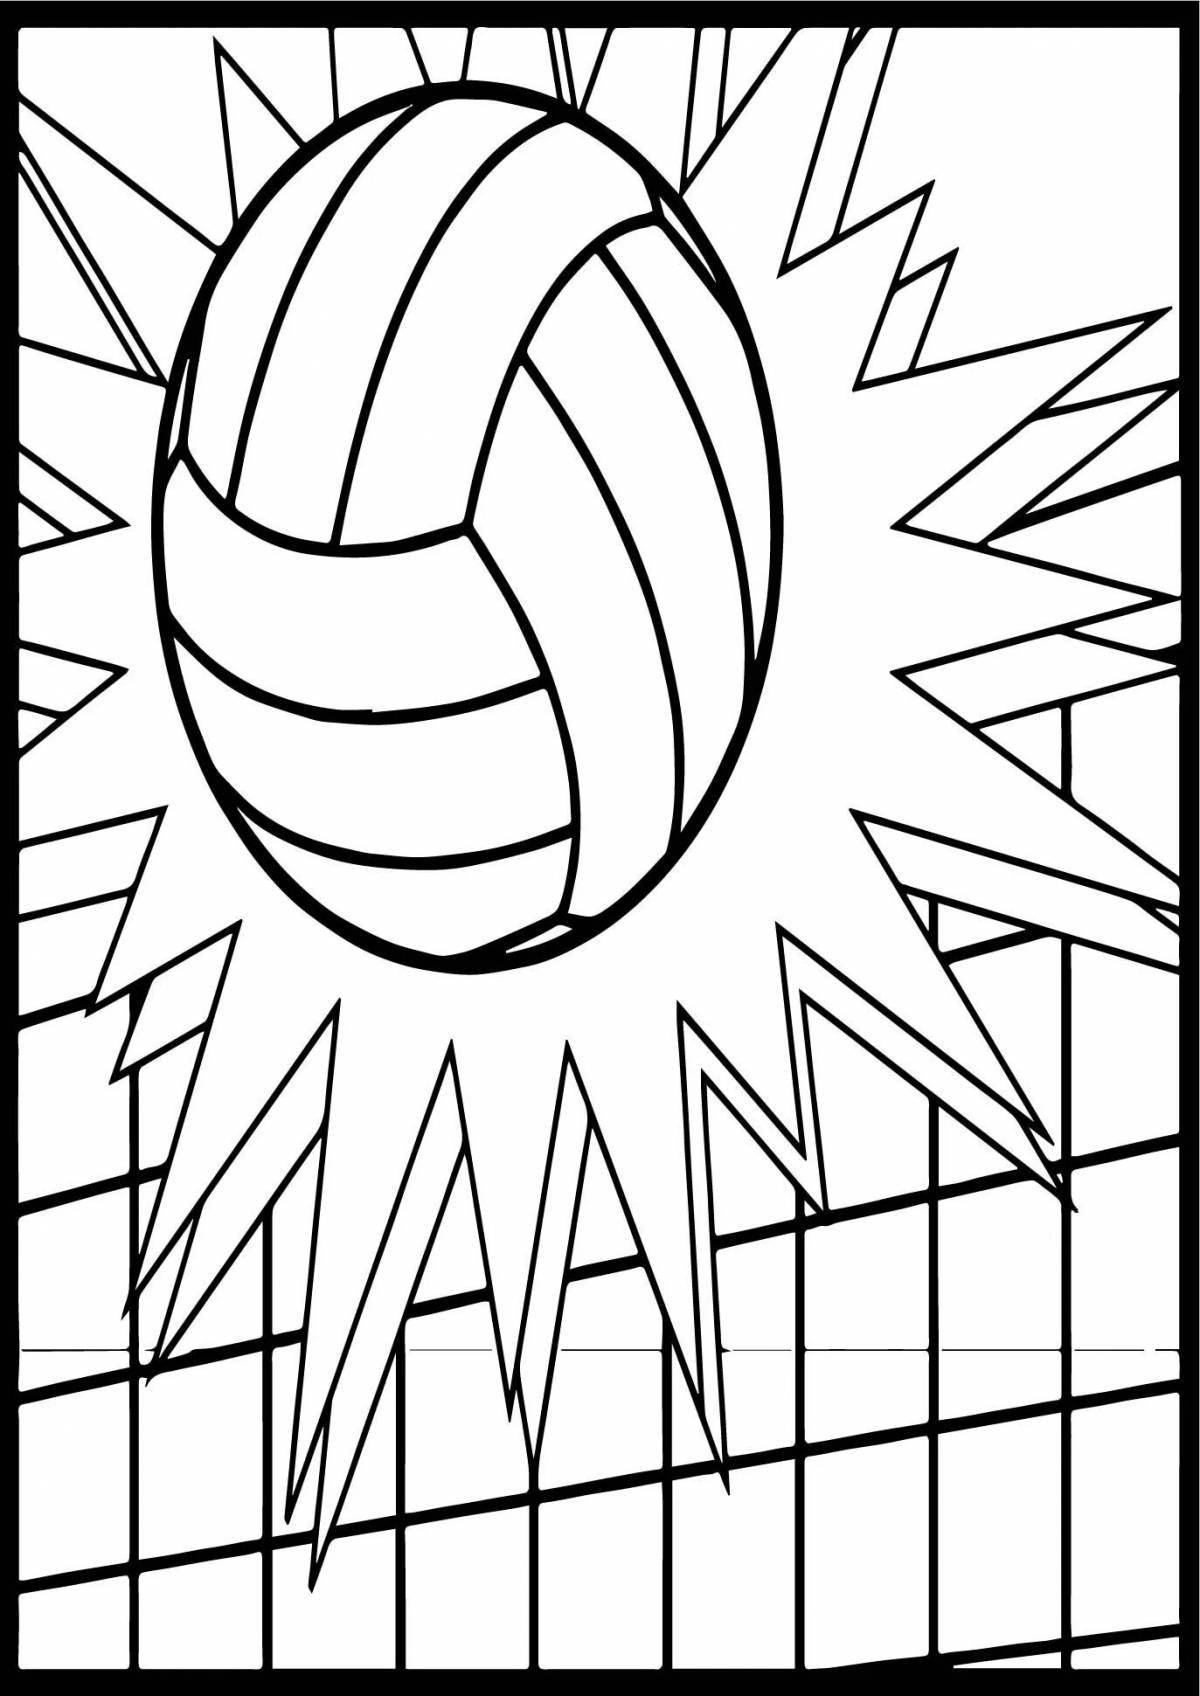 Fun volleyball coloring book for kids